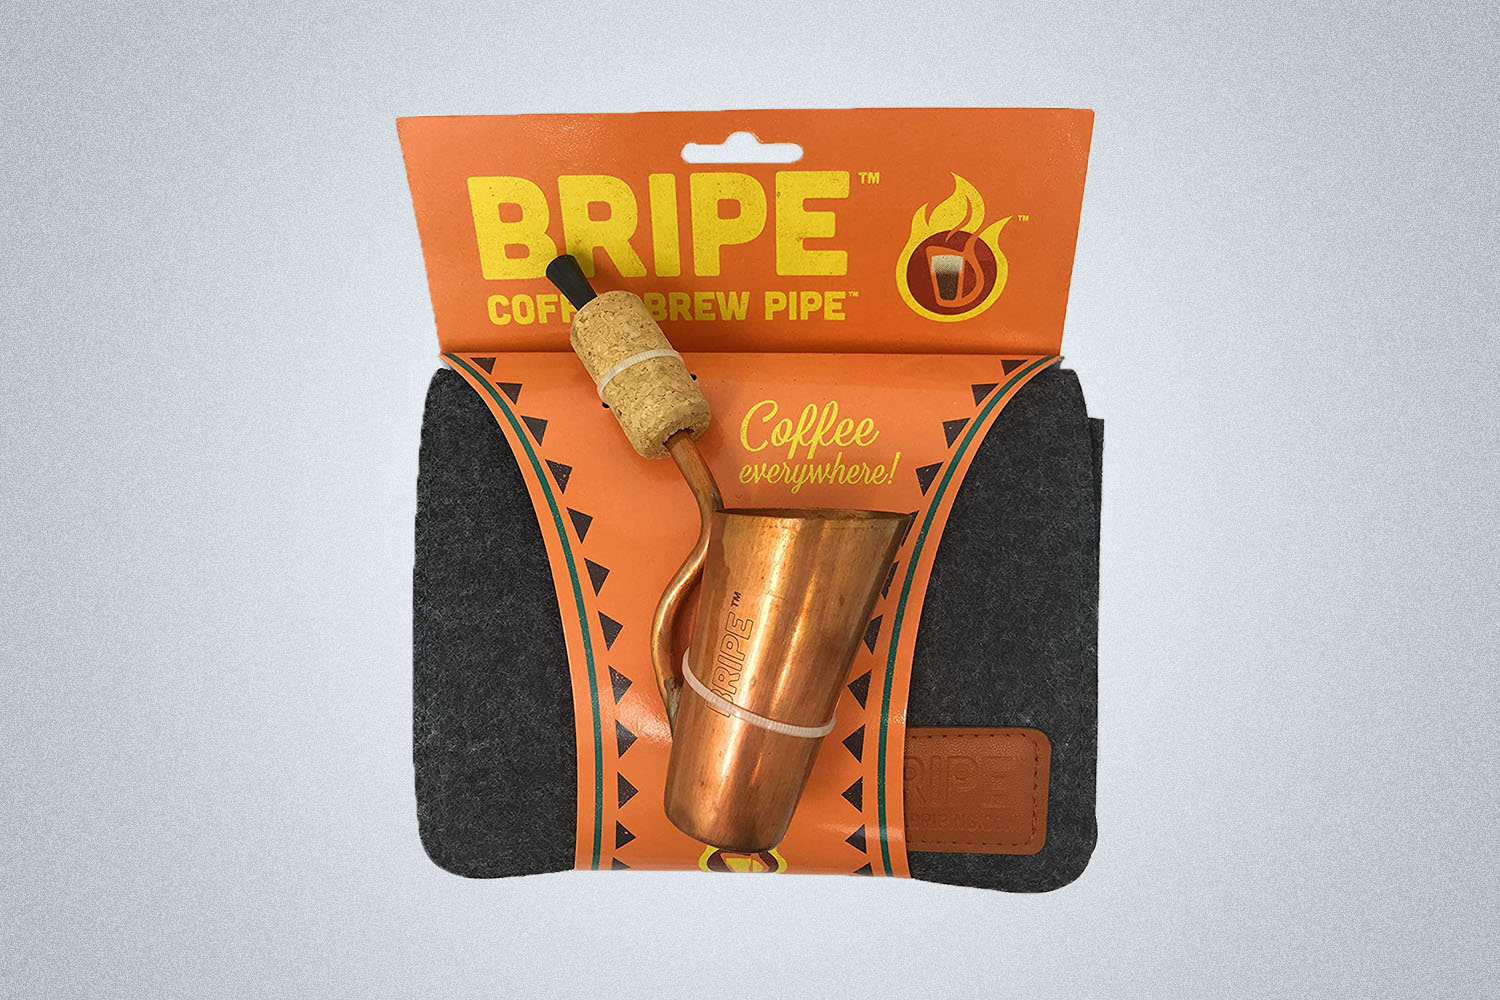 A Bripe Coffee Brew Pipe Kit on a gray background.